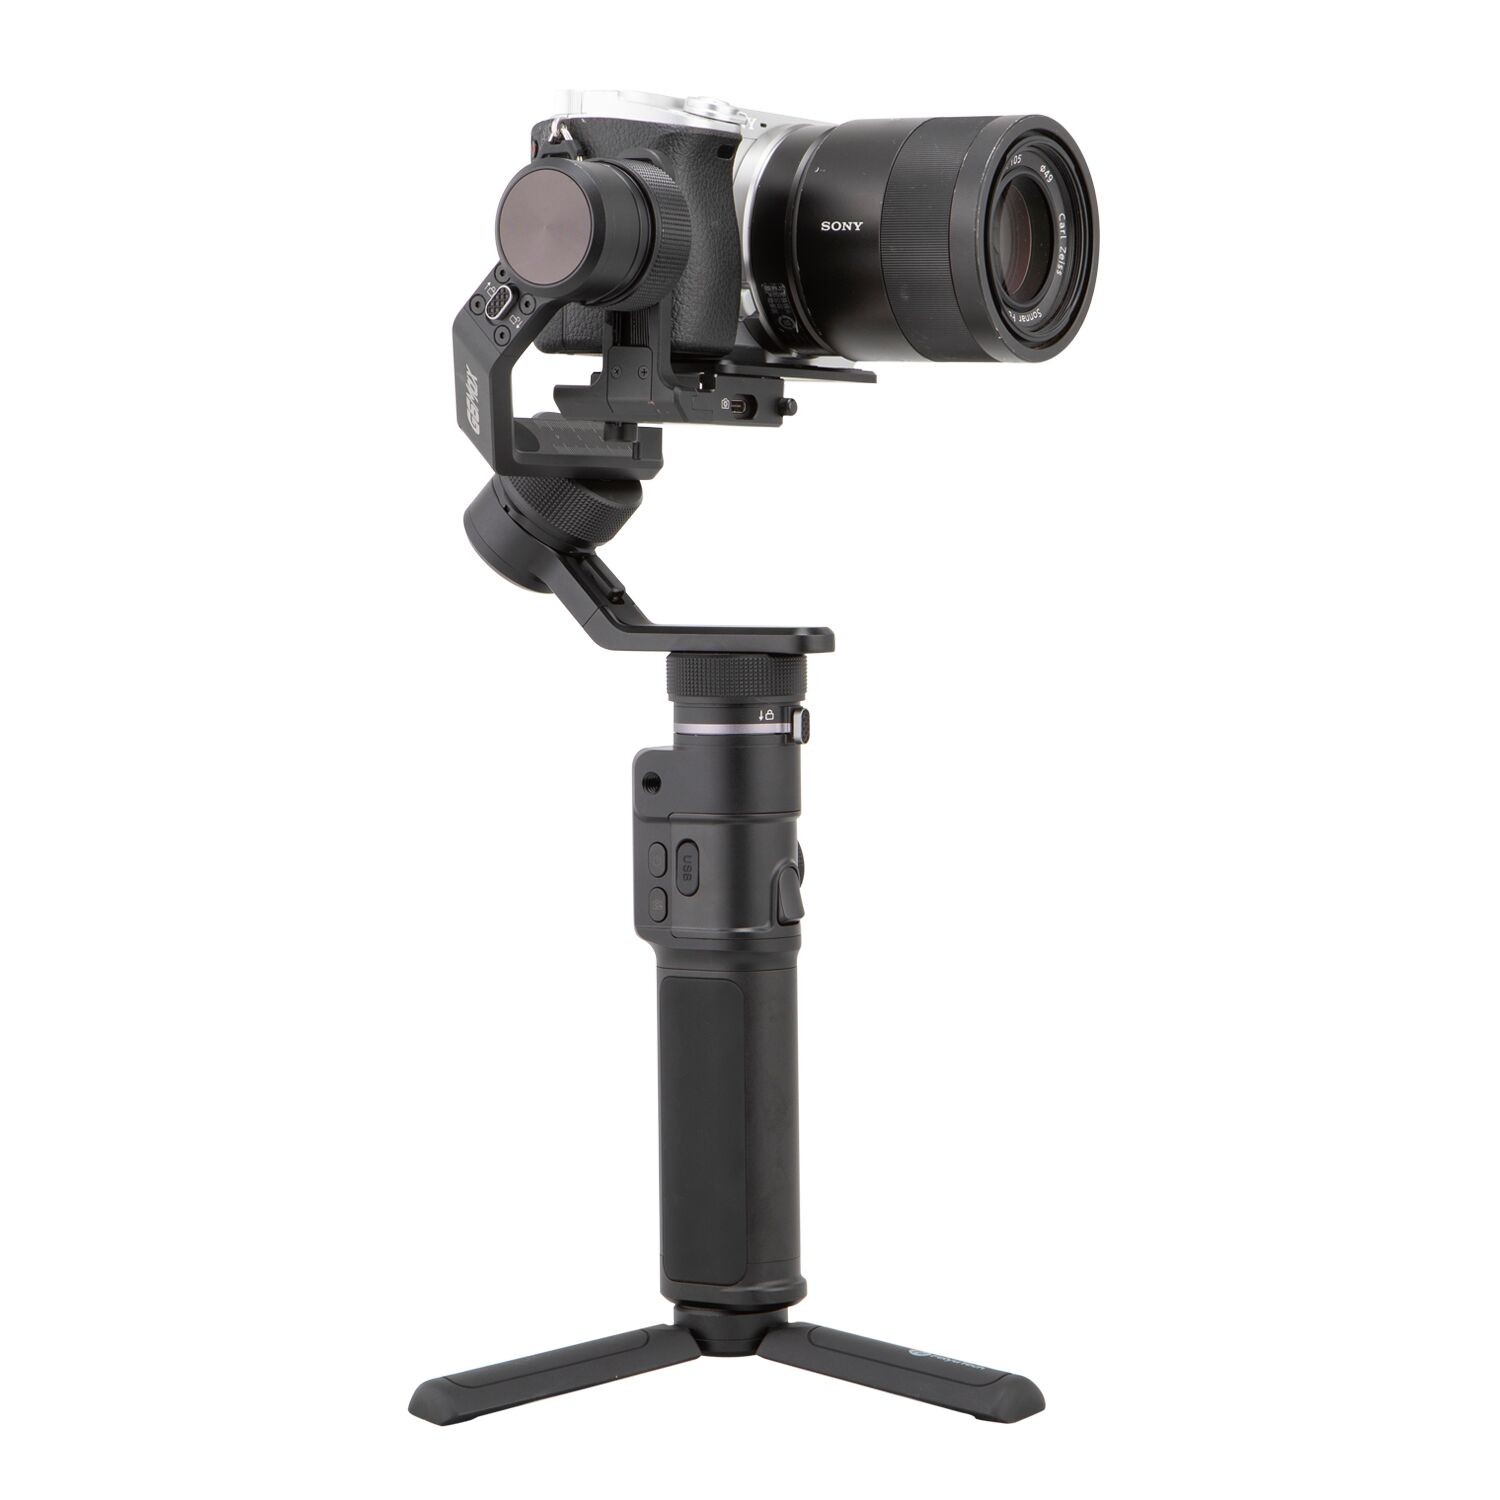 FeiyuTech G6 Max Gimbal 3 Axis Handheld Gimbal Stabilizer Fits Sony a6000 a6300 a6400 a6500 Canon EOS 200D II EOS M50 FujiFilm X-T30 GoPro 8 iPhone 11 Pro iPhone Xs Max Splashproof Max Payload 2.64lb 